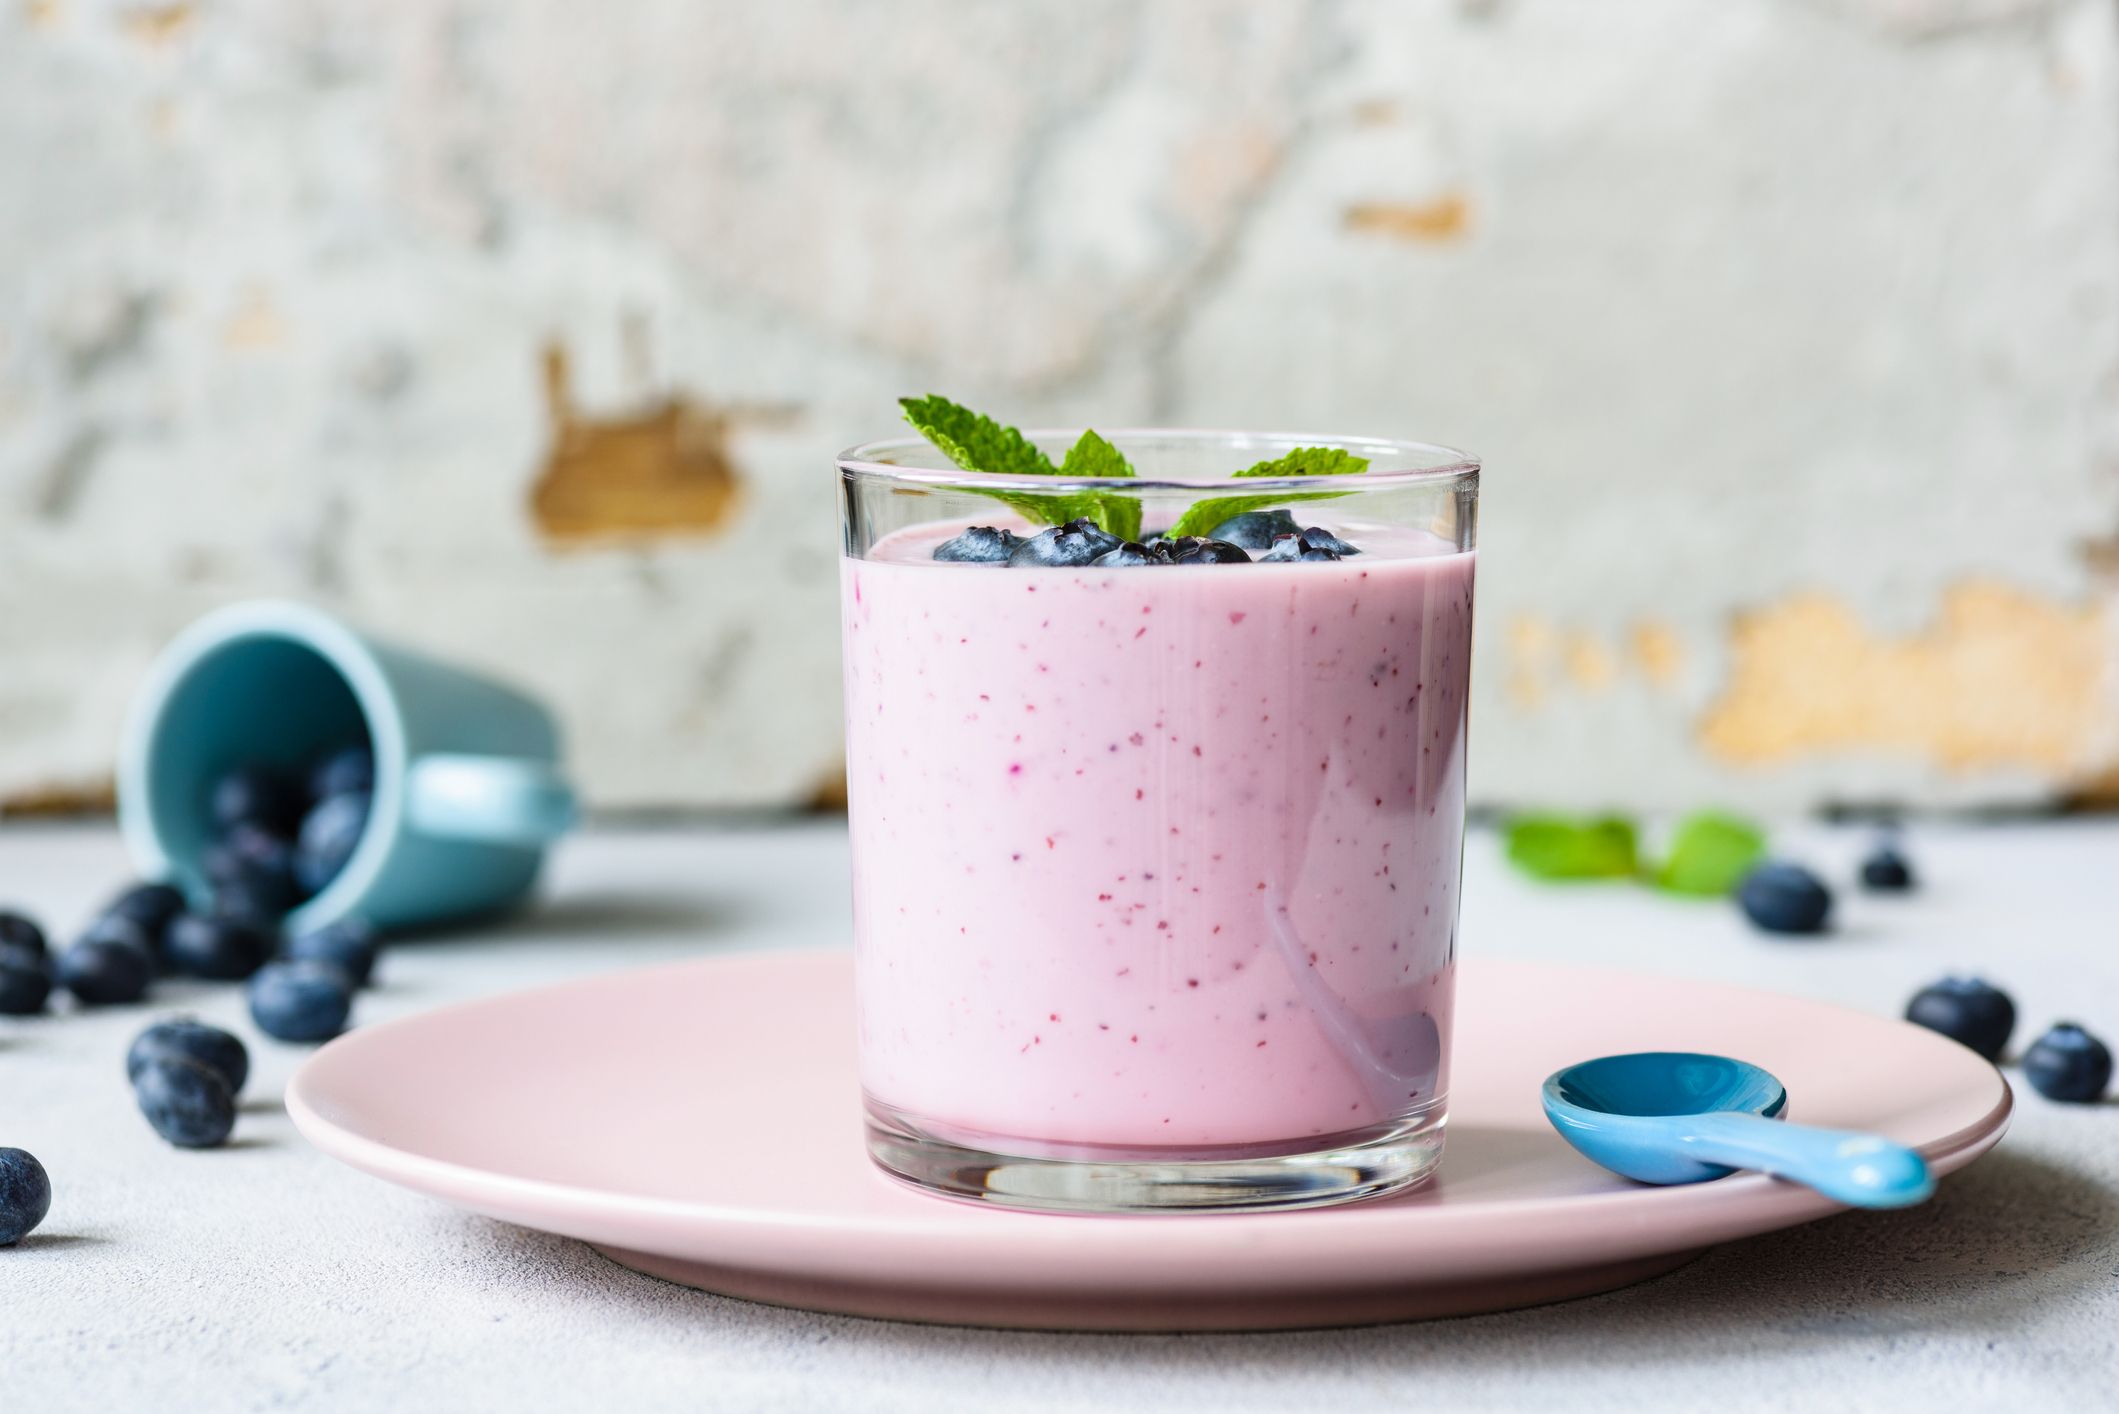 30 Best Smoothies For Weight Loss: Recipes for Healthy Smoothies - Parade